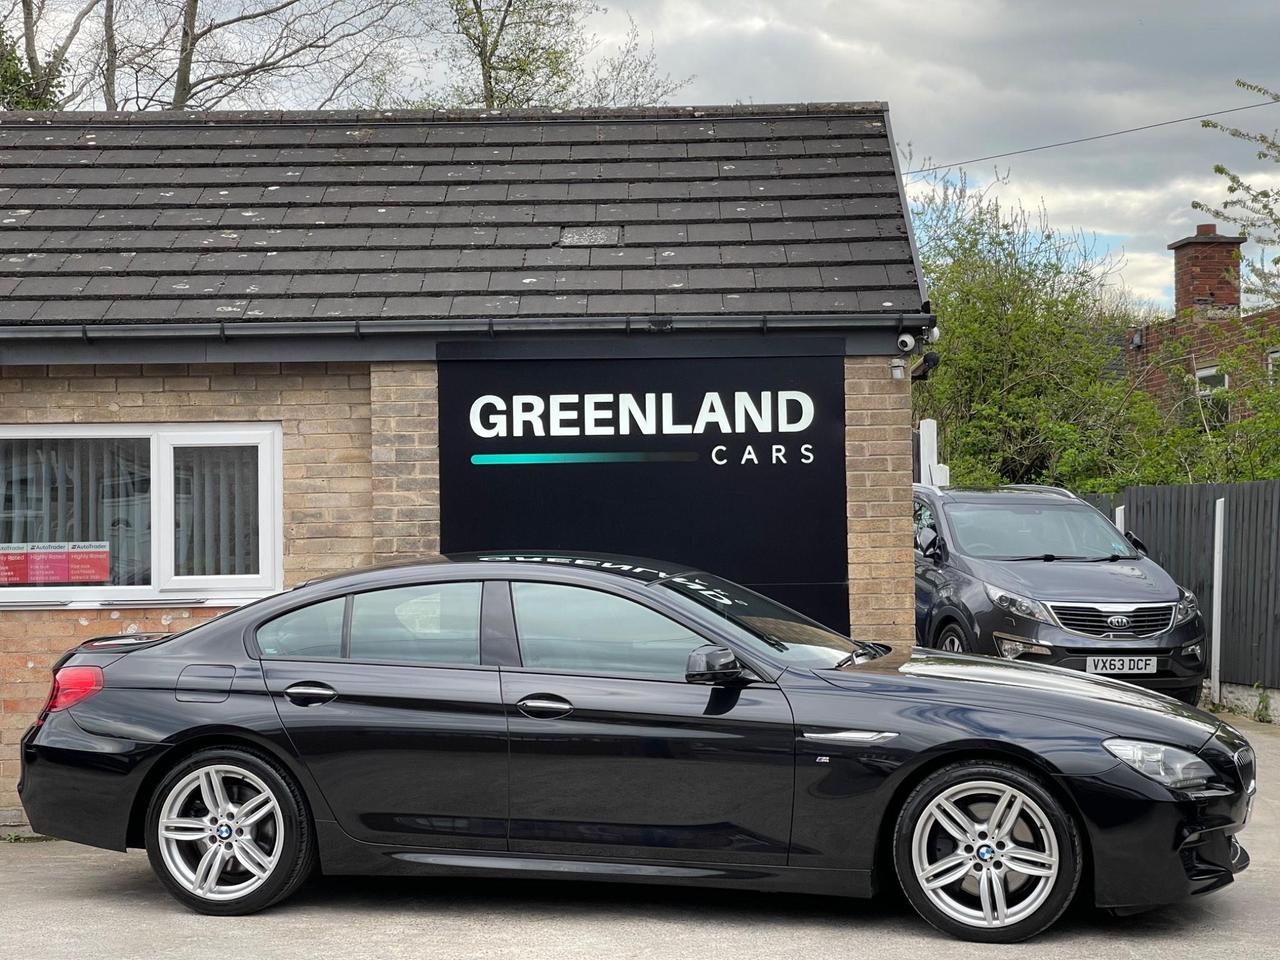 Used 2015 BMW 6 Series Gran Coupe for sale in Sheffield